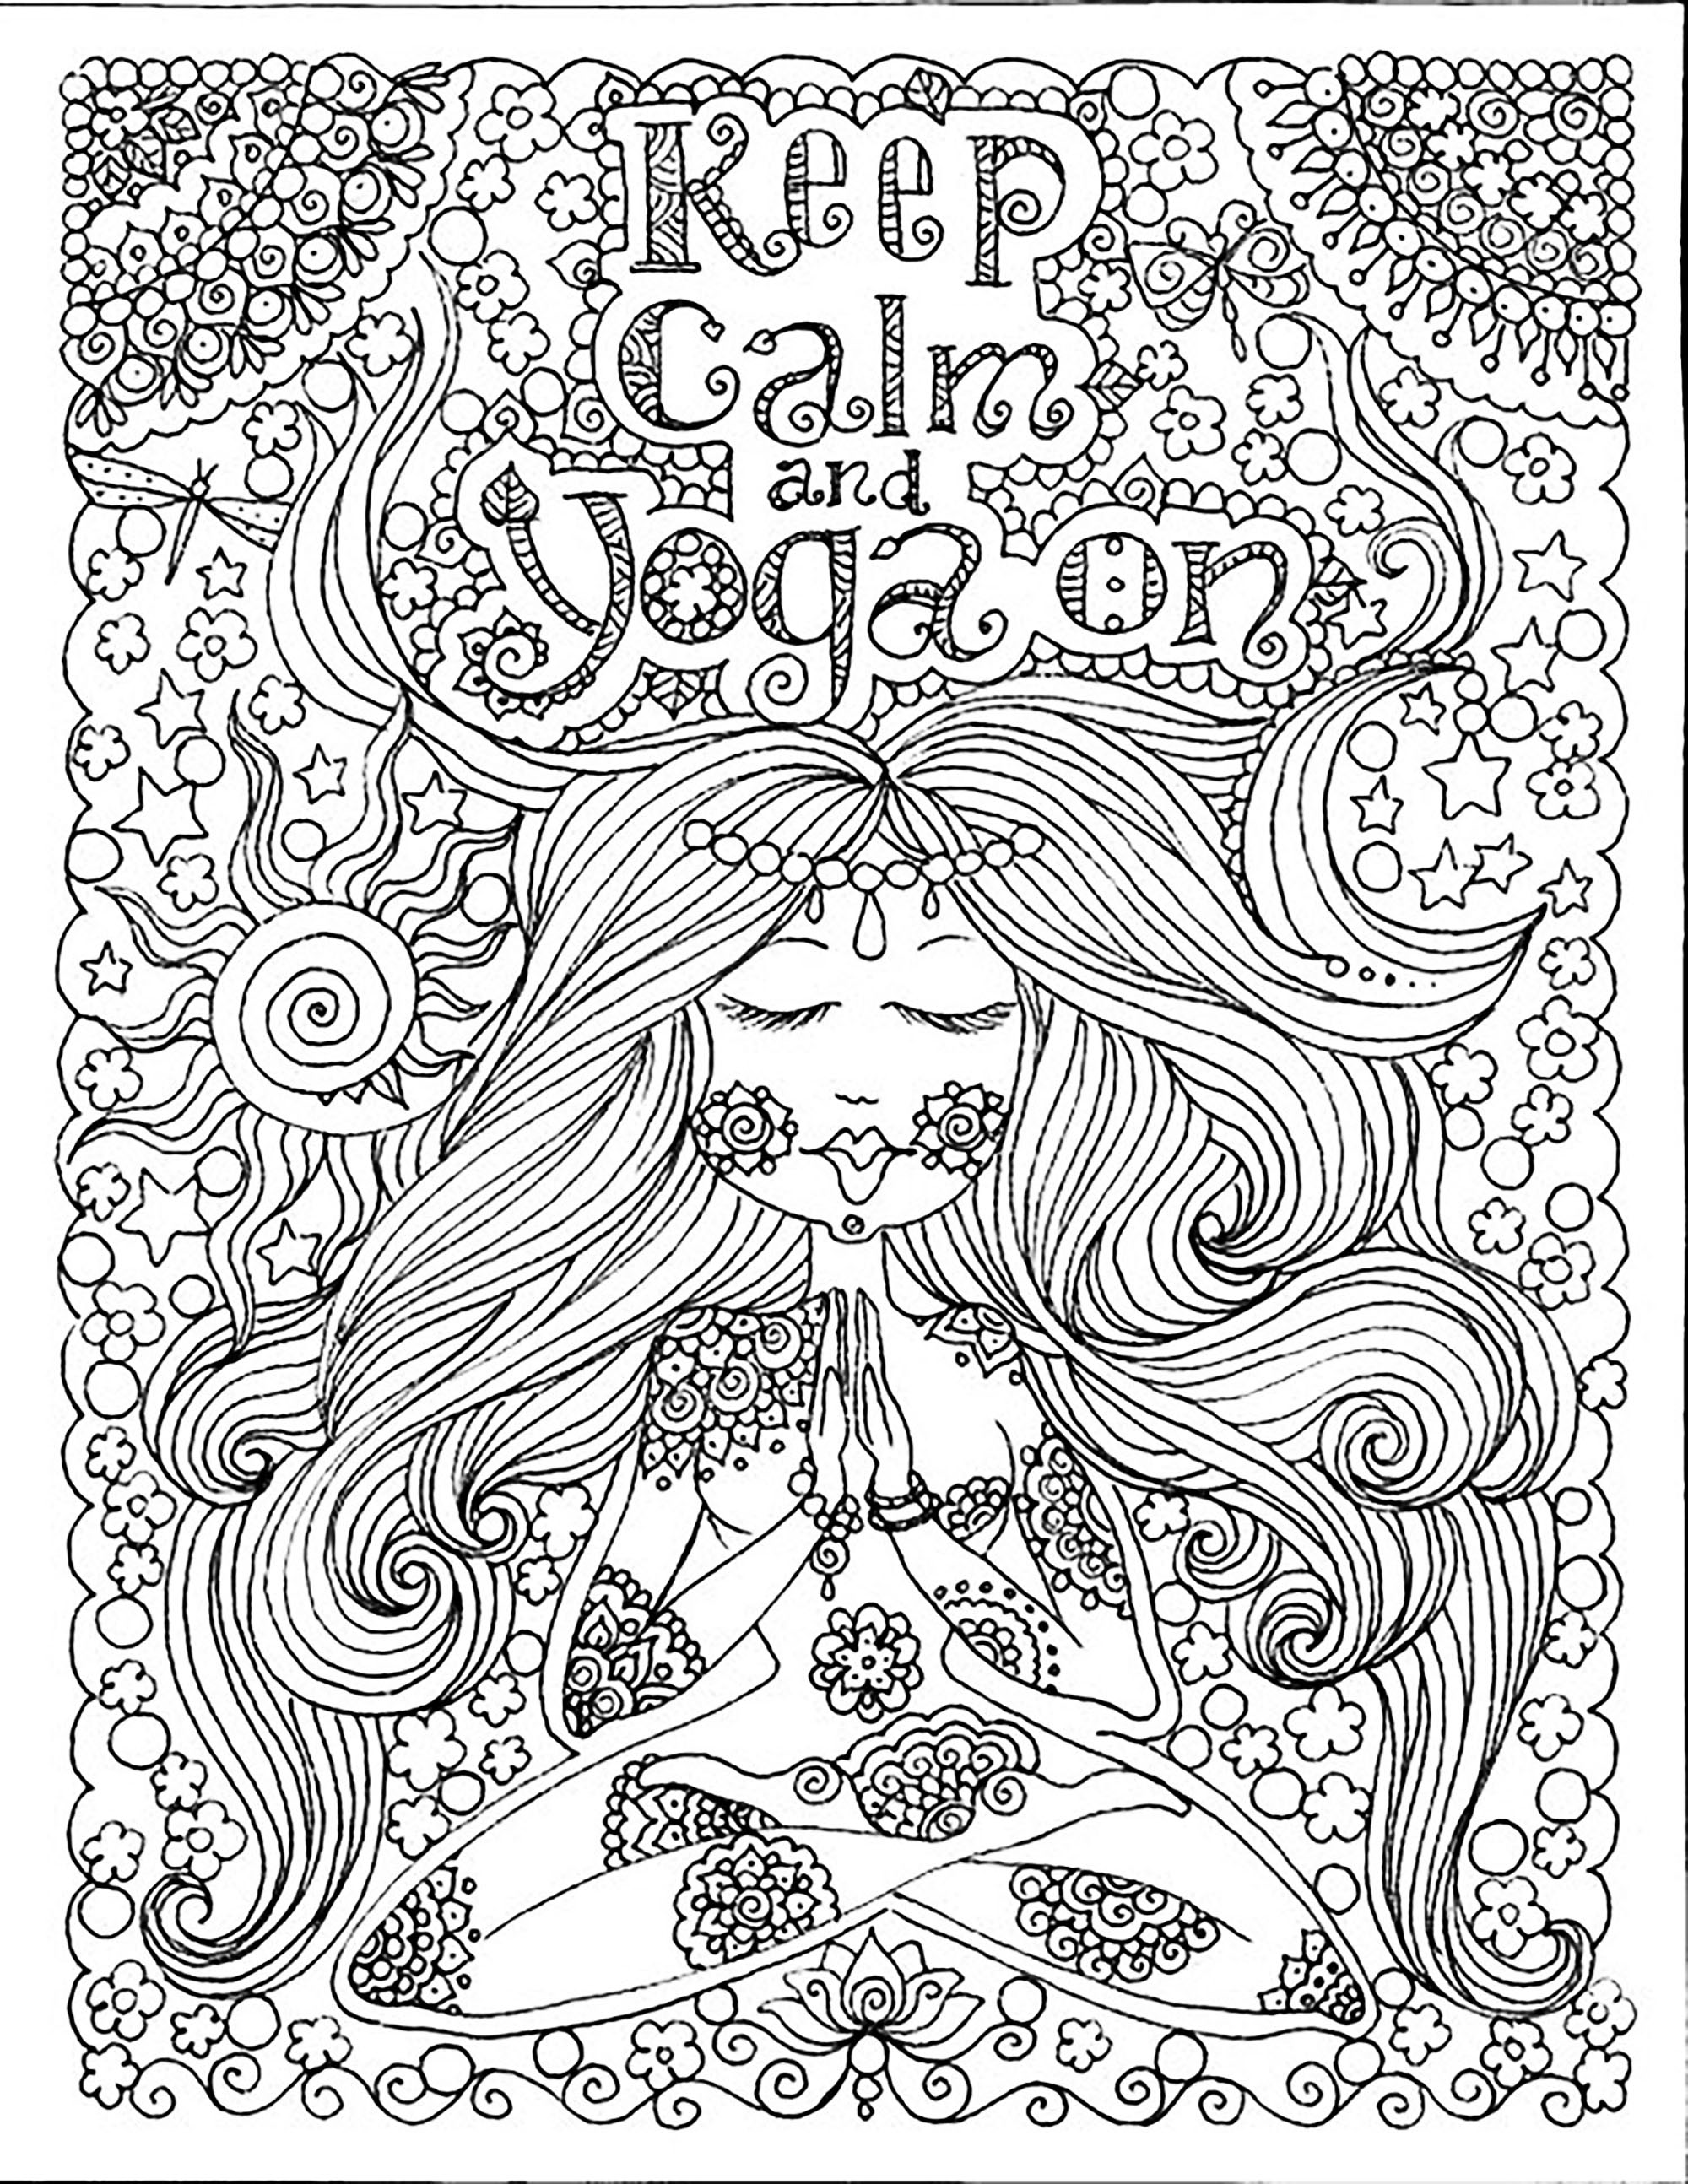 Girl Power: Empowering Women Adult Coloring Book (Stress Relieving Creative  Fun Drawings to Calm Down, Reduce Anxiety & Relax.)